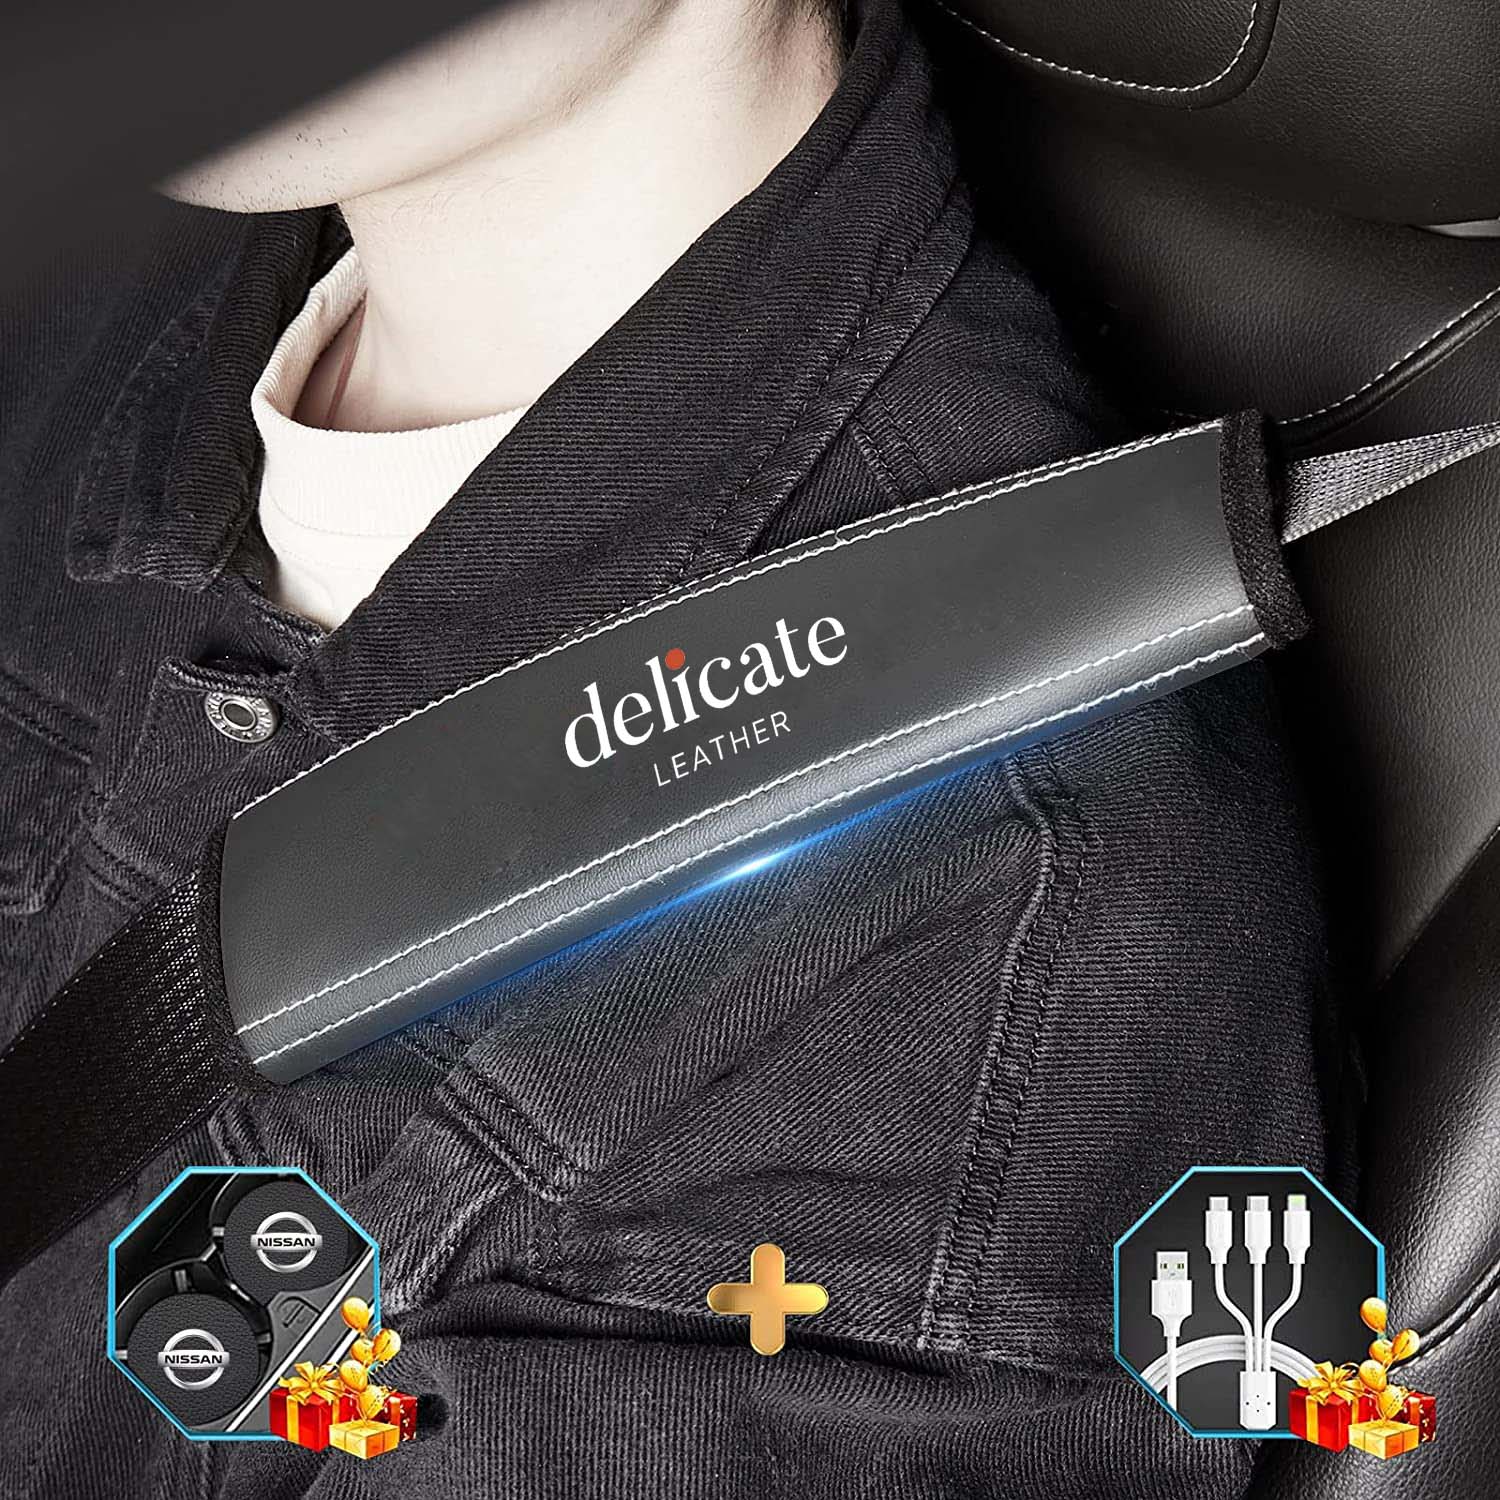 Delicate Leather Car Seat Belt Cover: Enhance Comfort and Safety on Your Drives